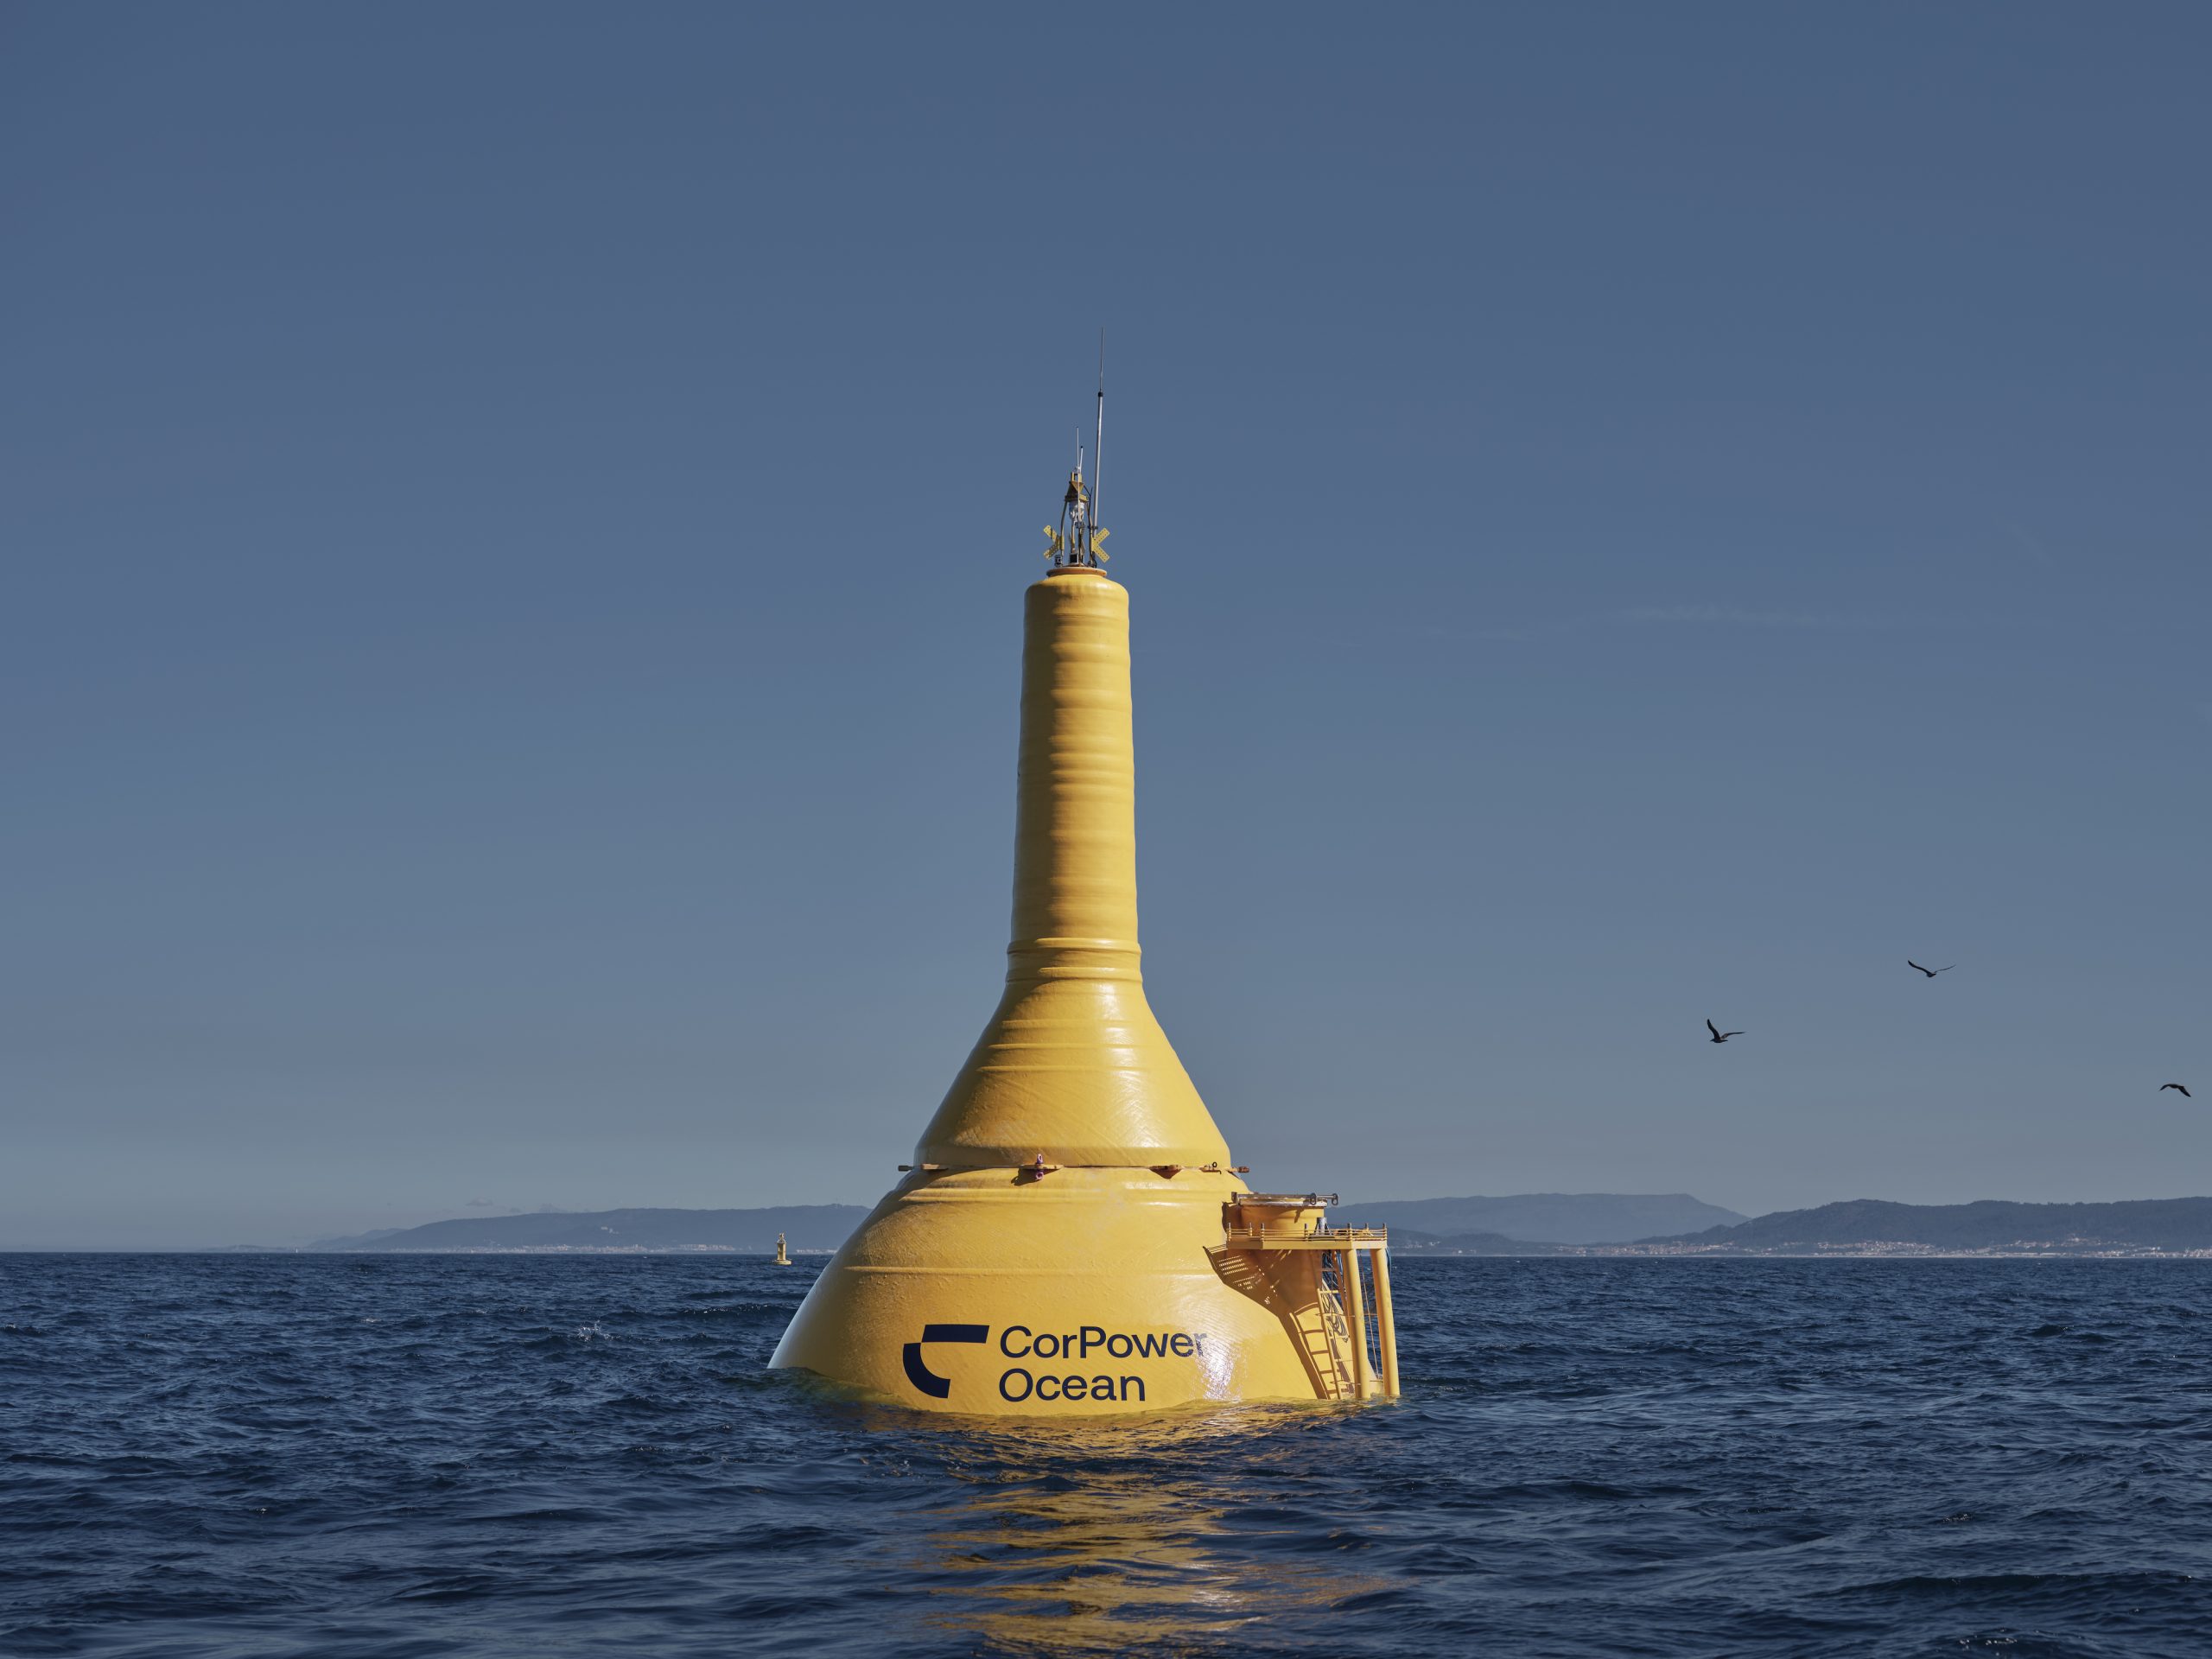 Corpower Ocean Achieves Milestone With Commercial Wave Energy Converter Deployment 8592